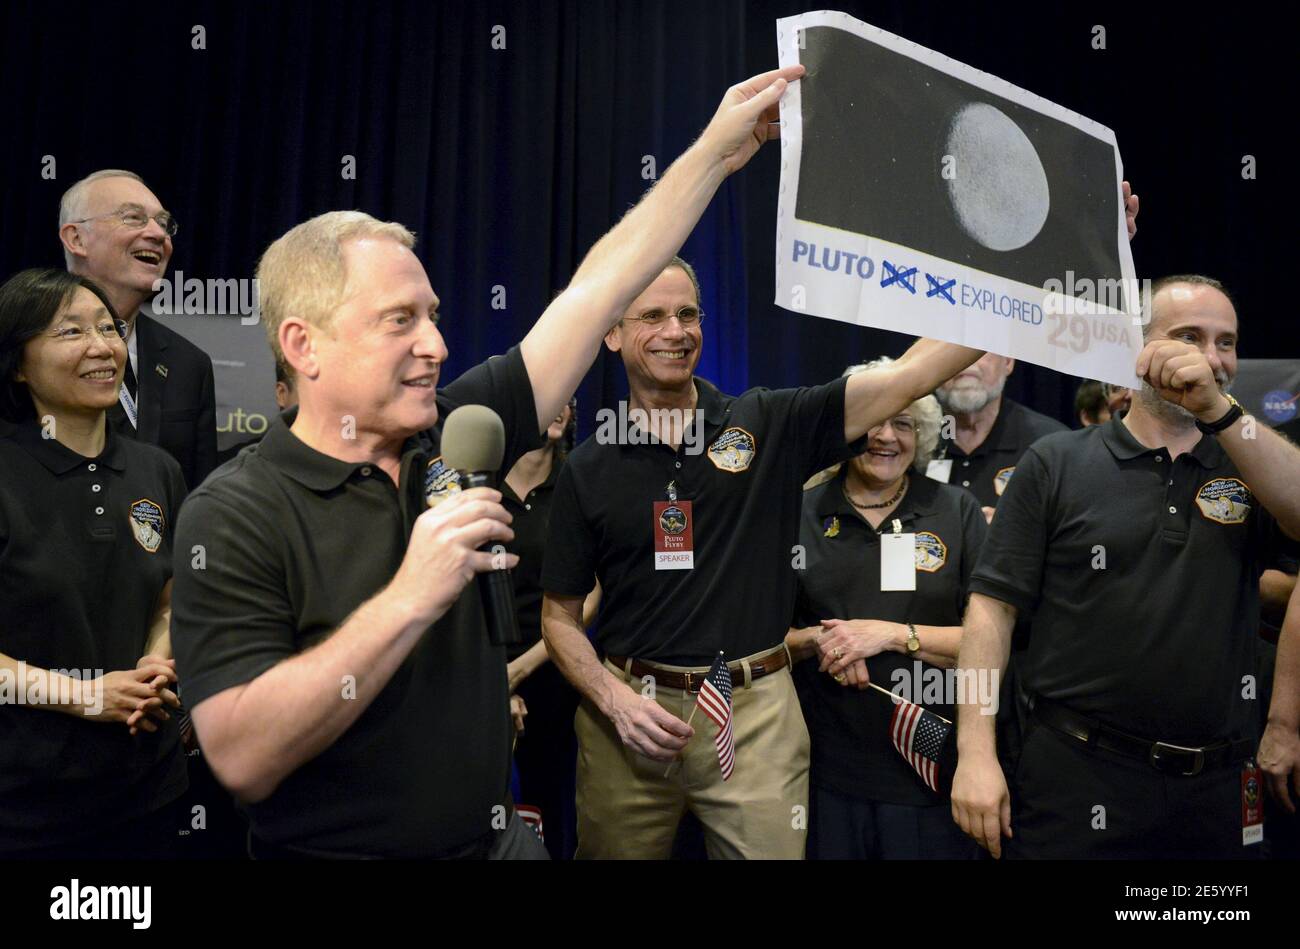 NASA Principal Investigator for New Horizons mission Alan Stern (L) and Co-Investigator Will Grundy (R) hold up an enlarged, out-dated U.S. postage stamp with the 'NOT YET' crossed out, during the celebration of the spacecraft New Horizons flyby of Pluto, at NASA's Johns Hopkins Applied Physics Laboratory in Laurel, Maryland, July 14, 2015. The flyby, which culminated after almost ten years of flight and over three billion miles, will allow New Horizons to photograph and collect data in the coming months.                            REUTERS/Mike Theiler      TPX IMAGES OF THE DAY Stock Photo